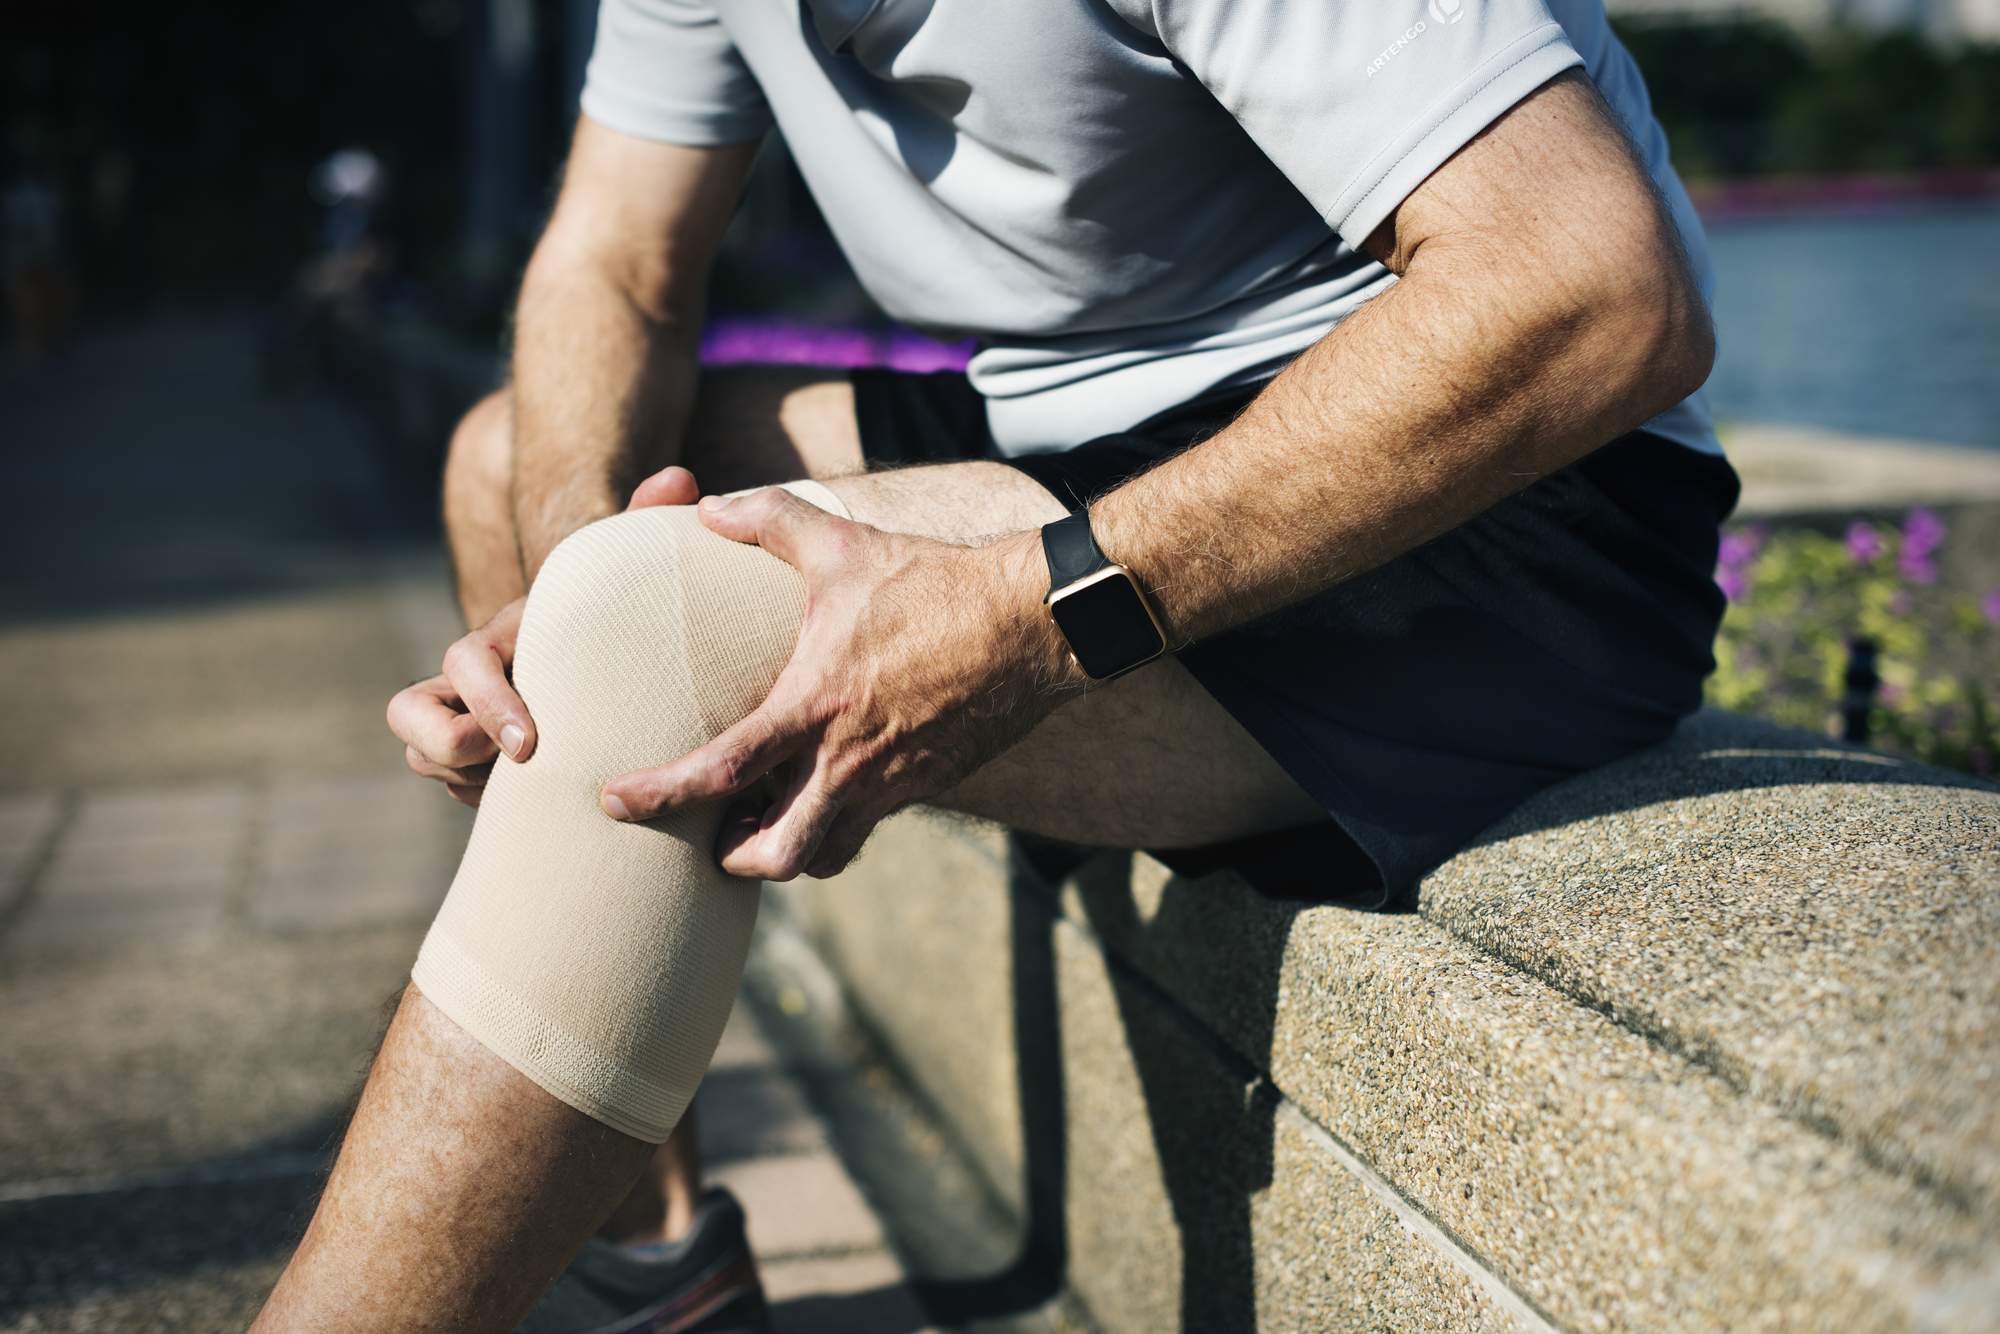 What Are the Most Common Knee Injuries?